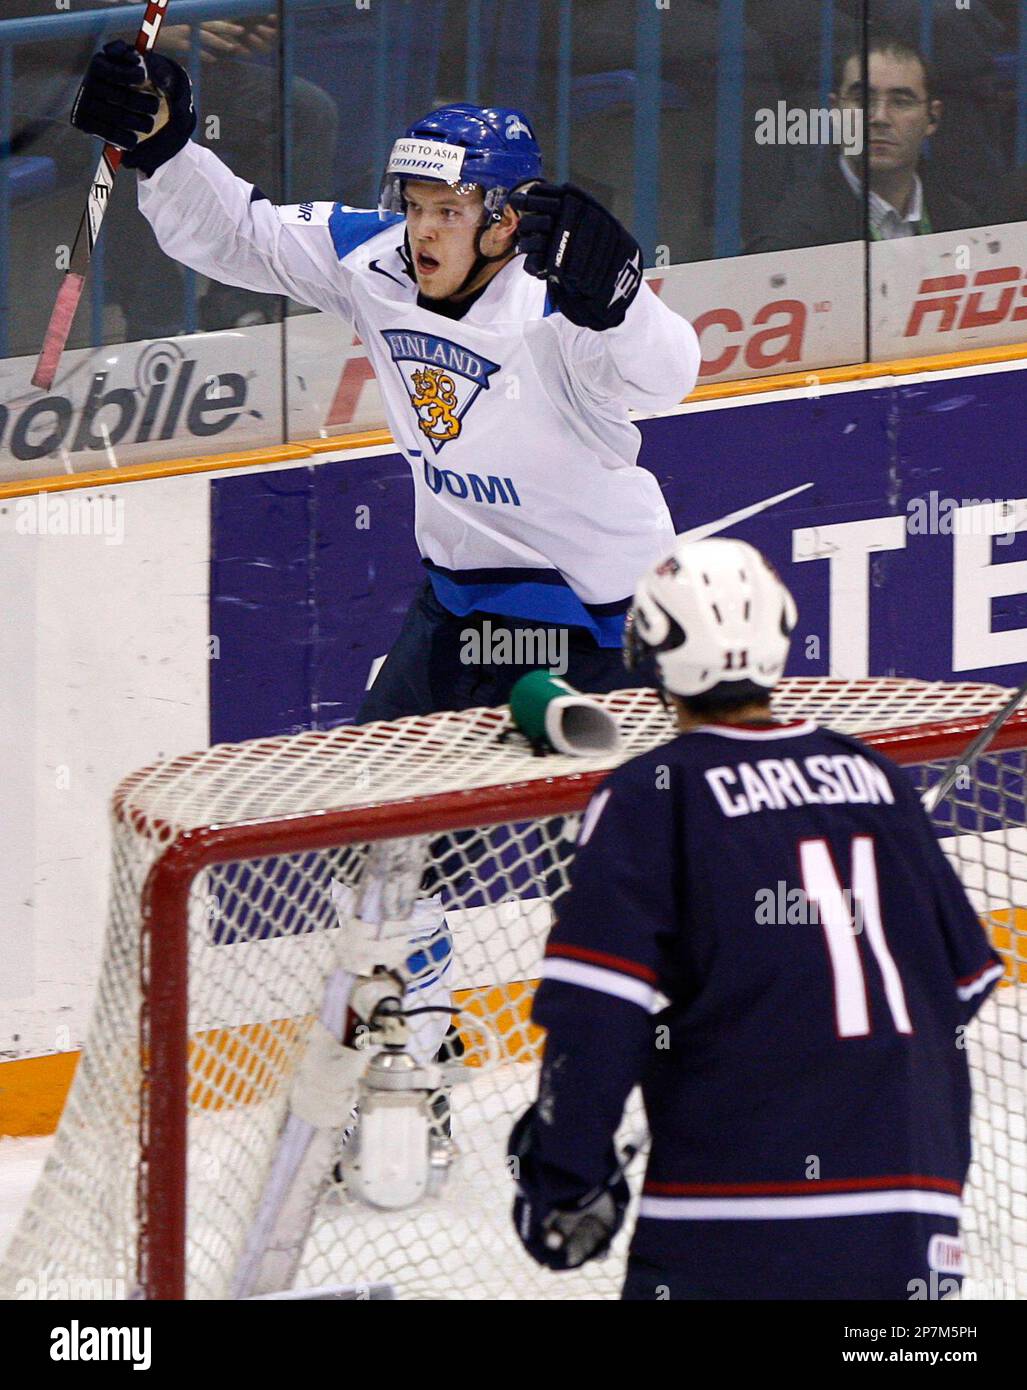 Team Finland's Eero Elo celebrates his goal as Team USA's John Carlson (11)  watches during the second period of a quarter final hockey game at the  world junior hockey championship on Saturday,